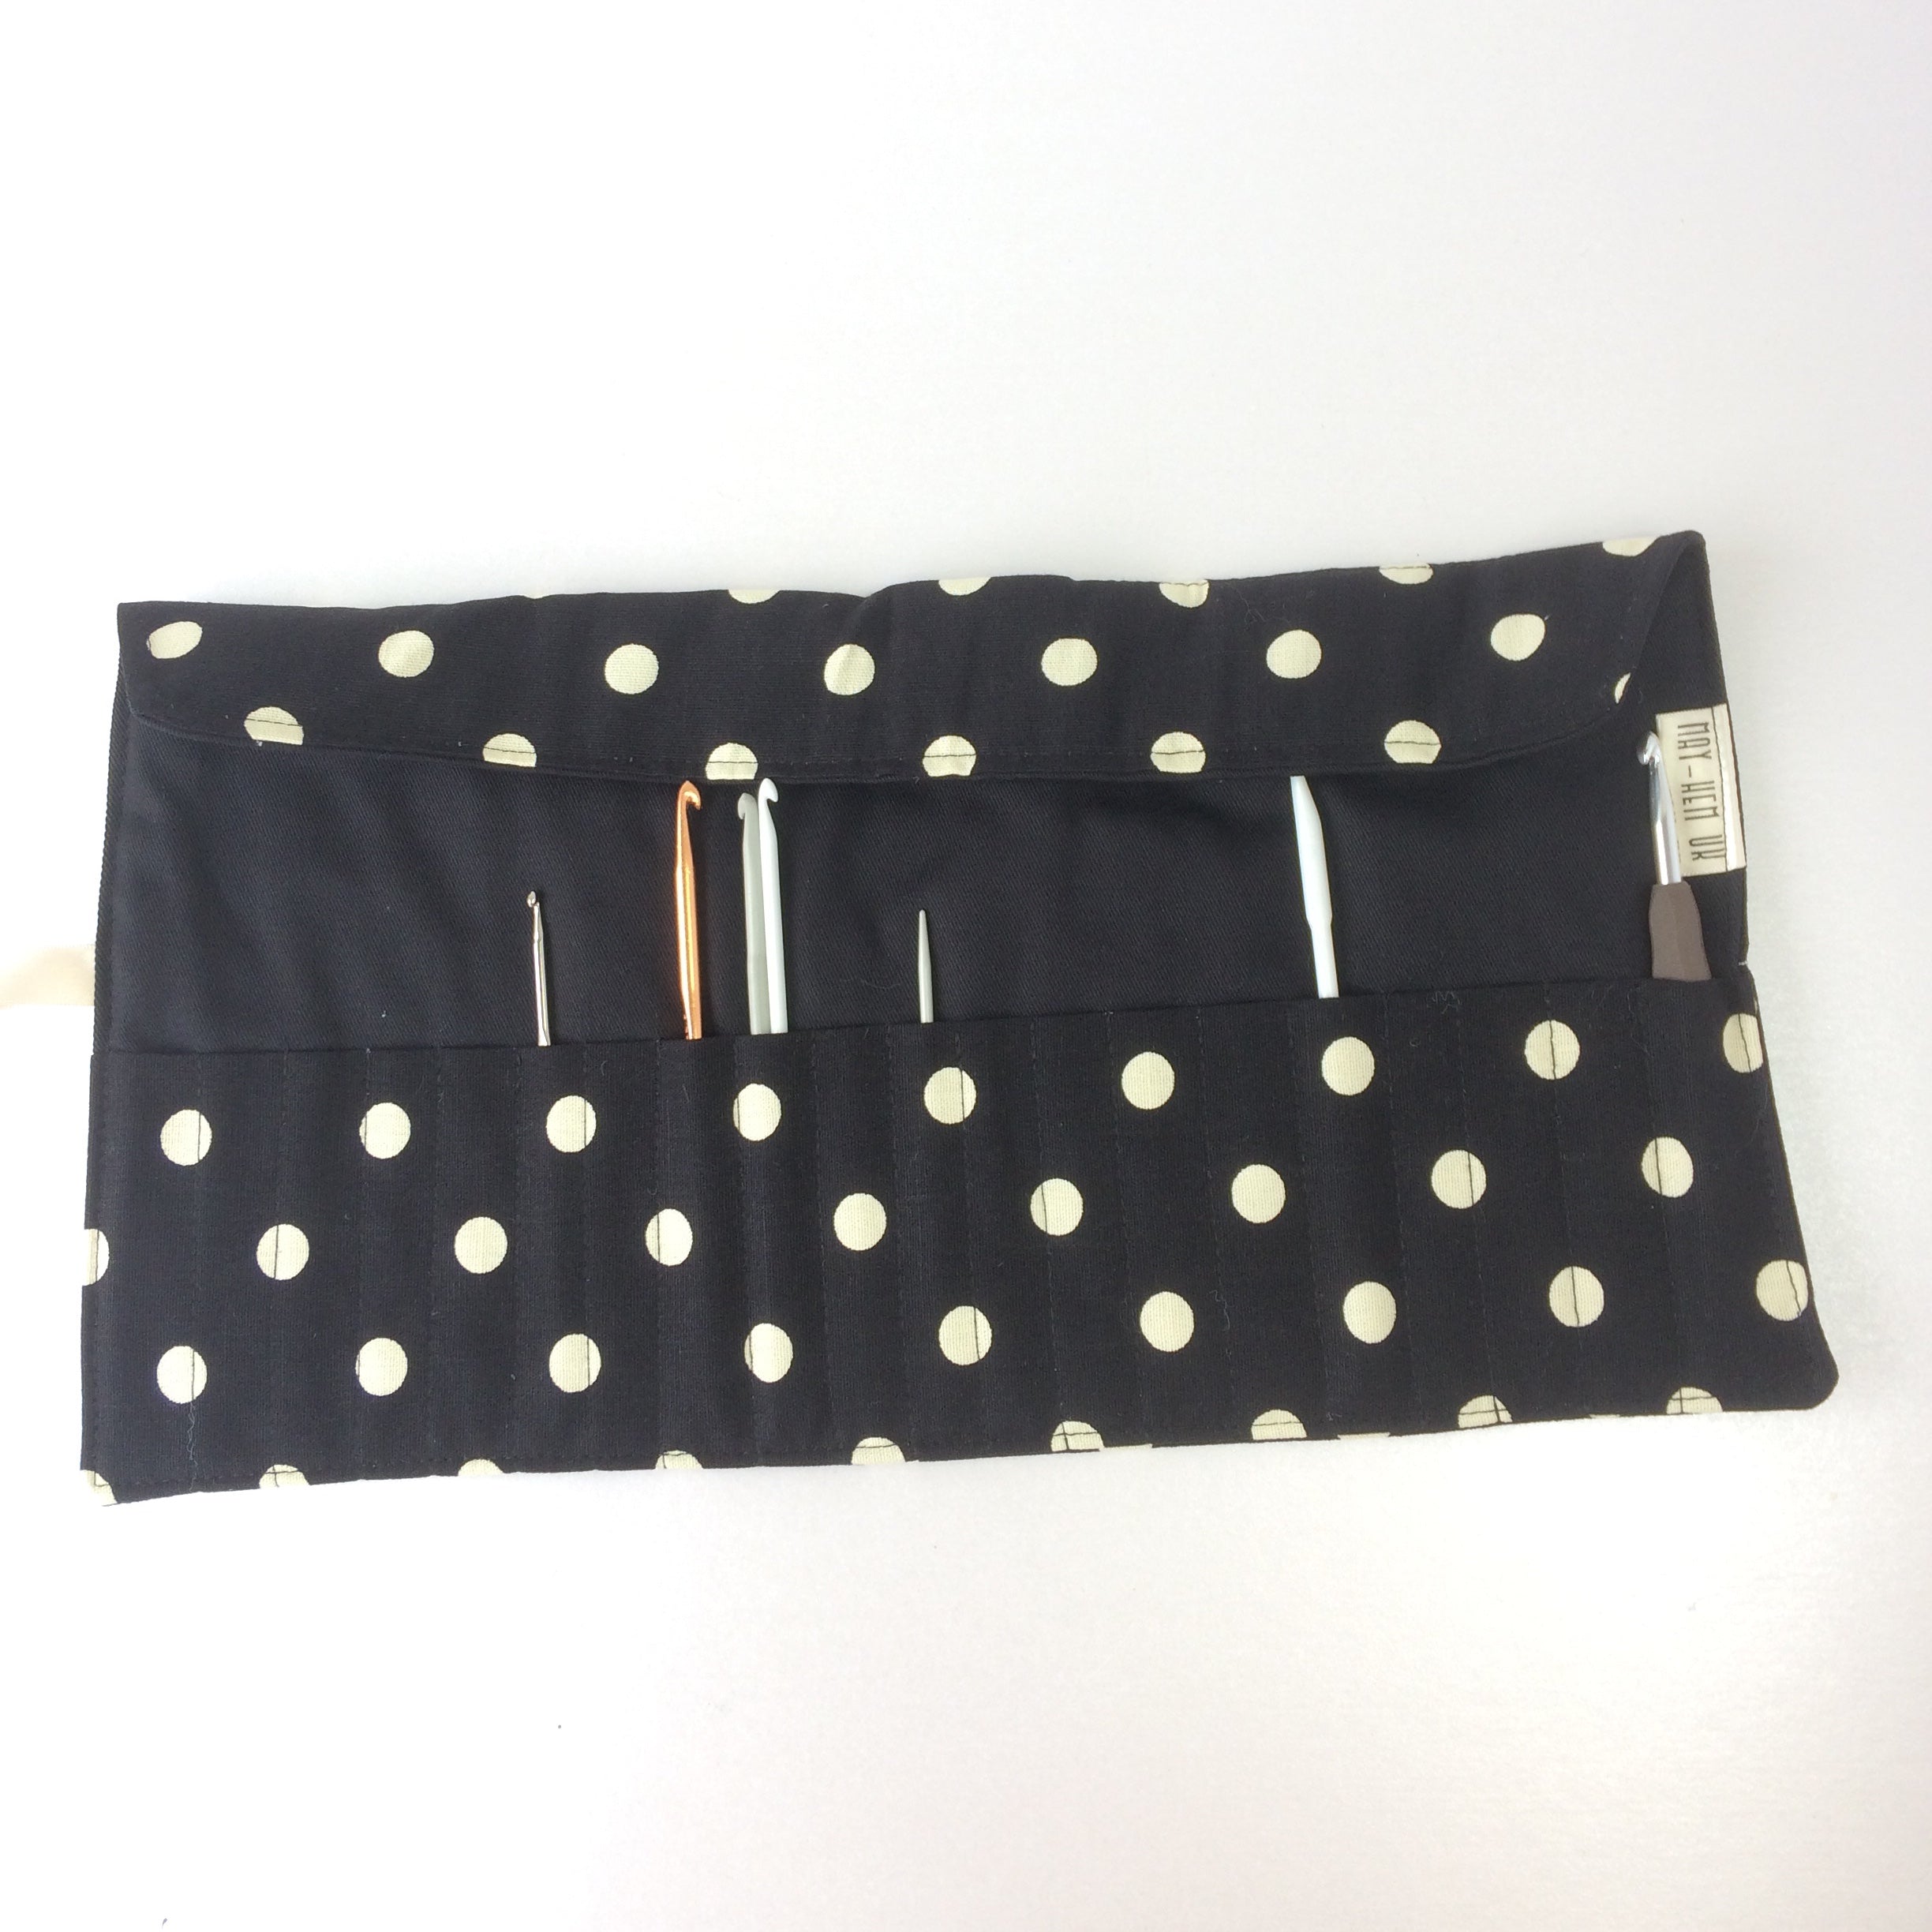 Knitting Needle or Crochet Hook Roll | Black Spotted